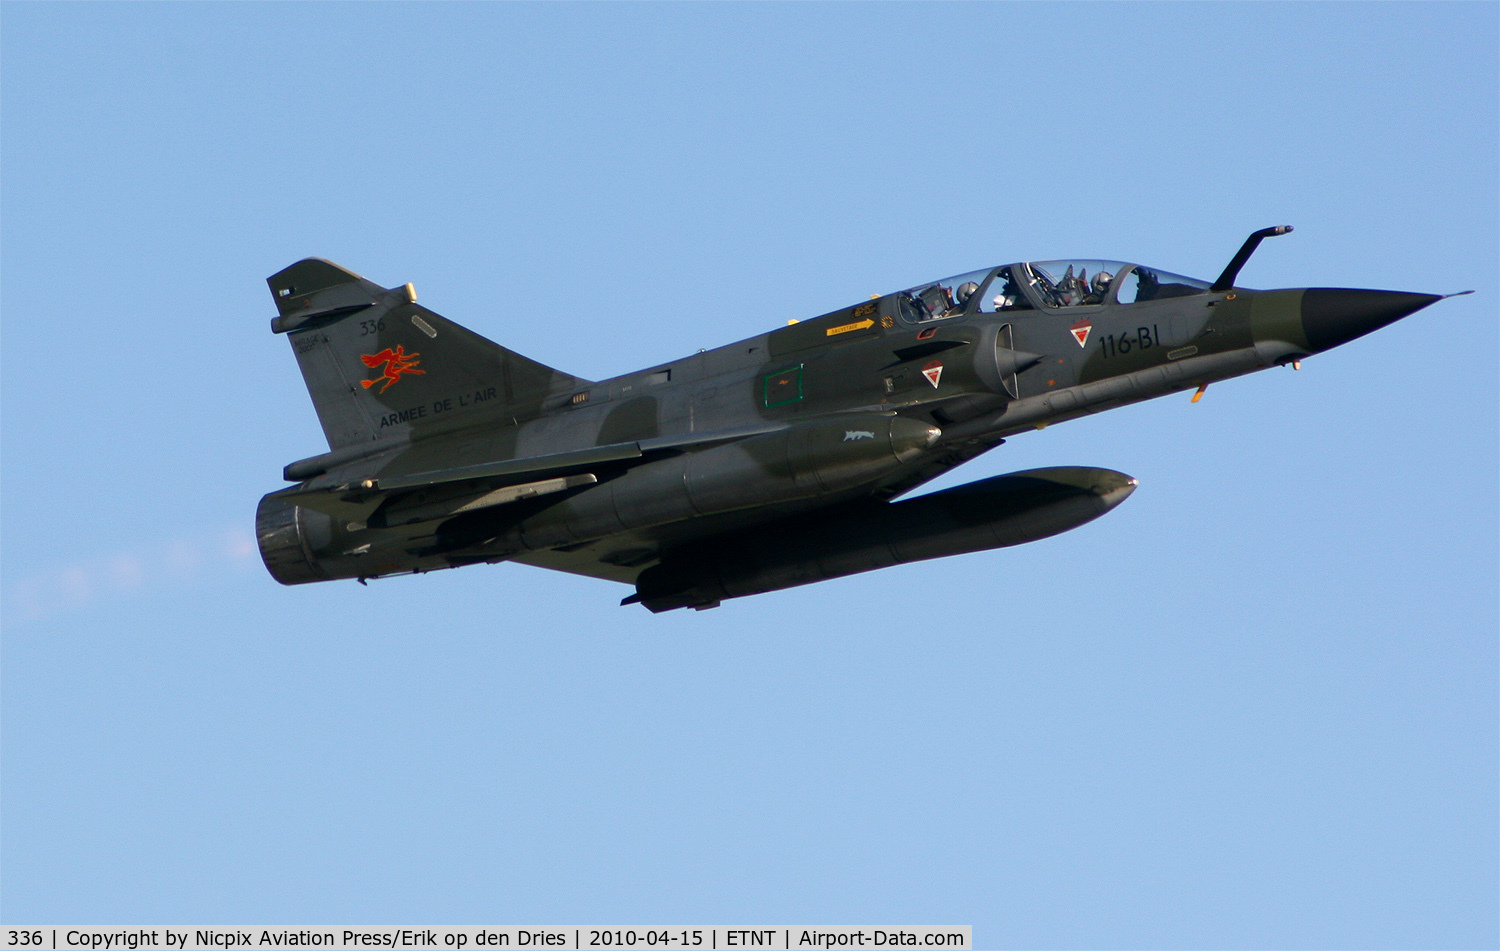 336, Dassault Mirage 2000N C/N 336, Mirage-2000N 336/116-BI is a nucelar attack aircraft and here to be seen during the NATO exercise Brilliant Arden in the take off at Wittmund AB, Germany